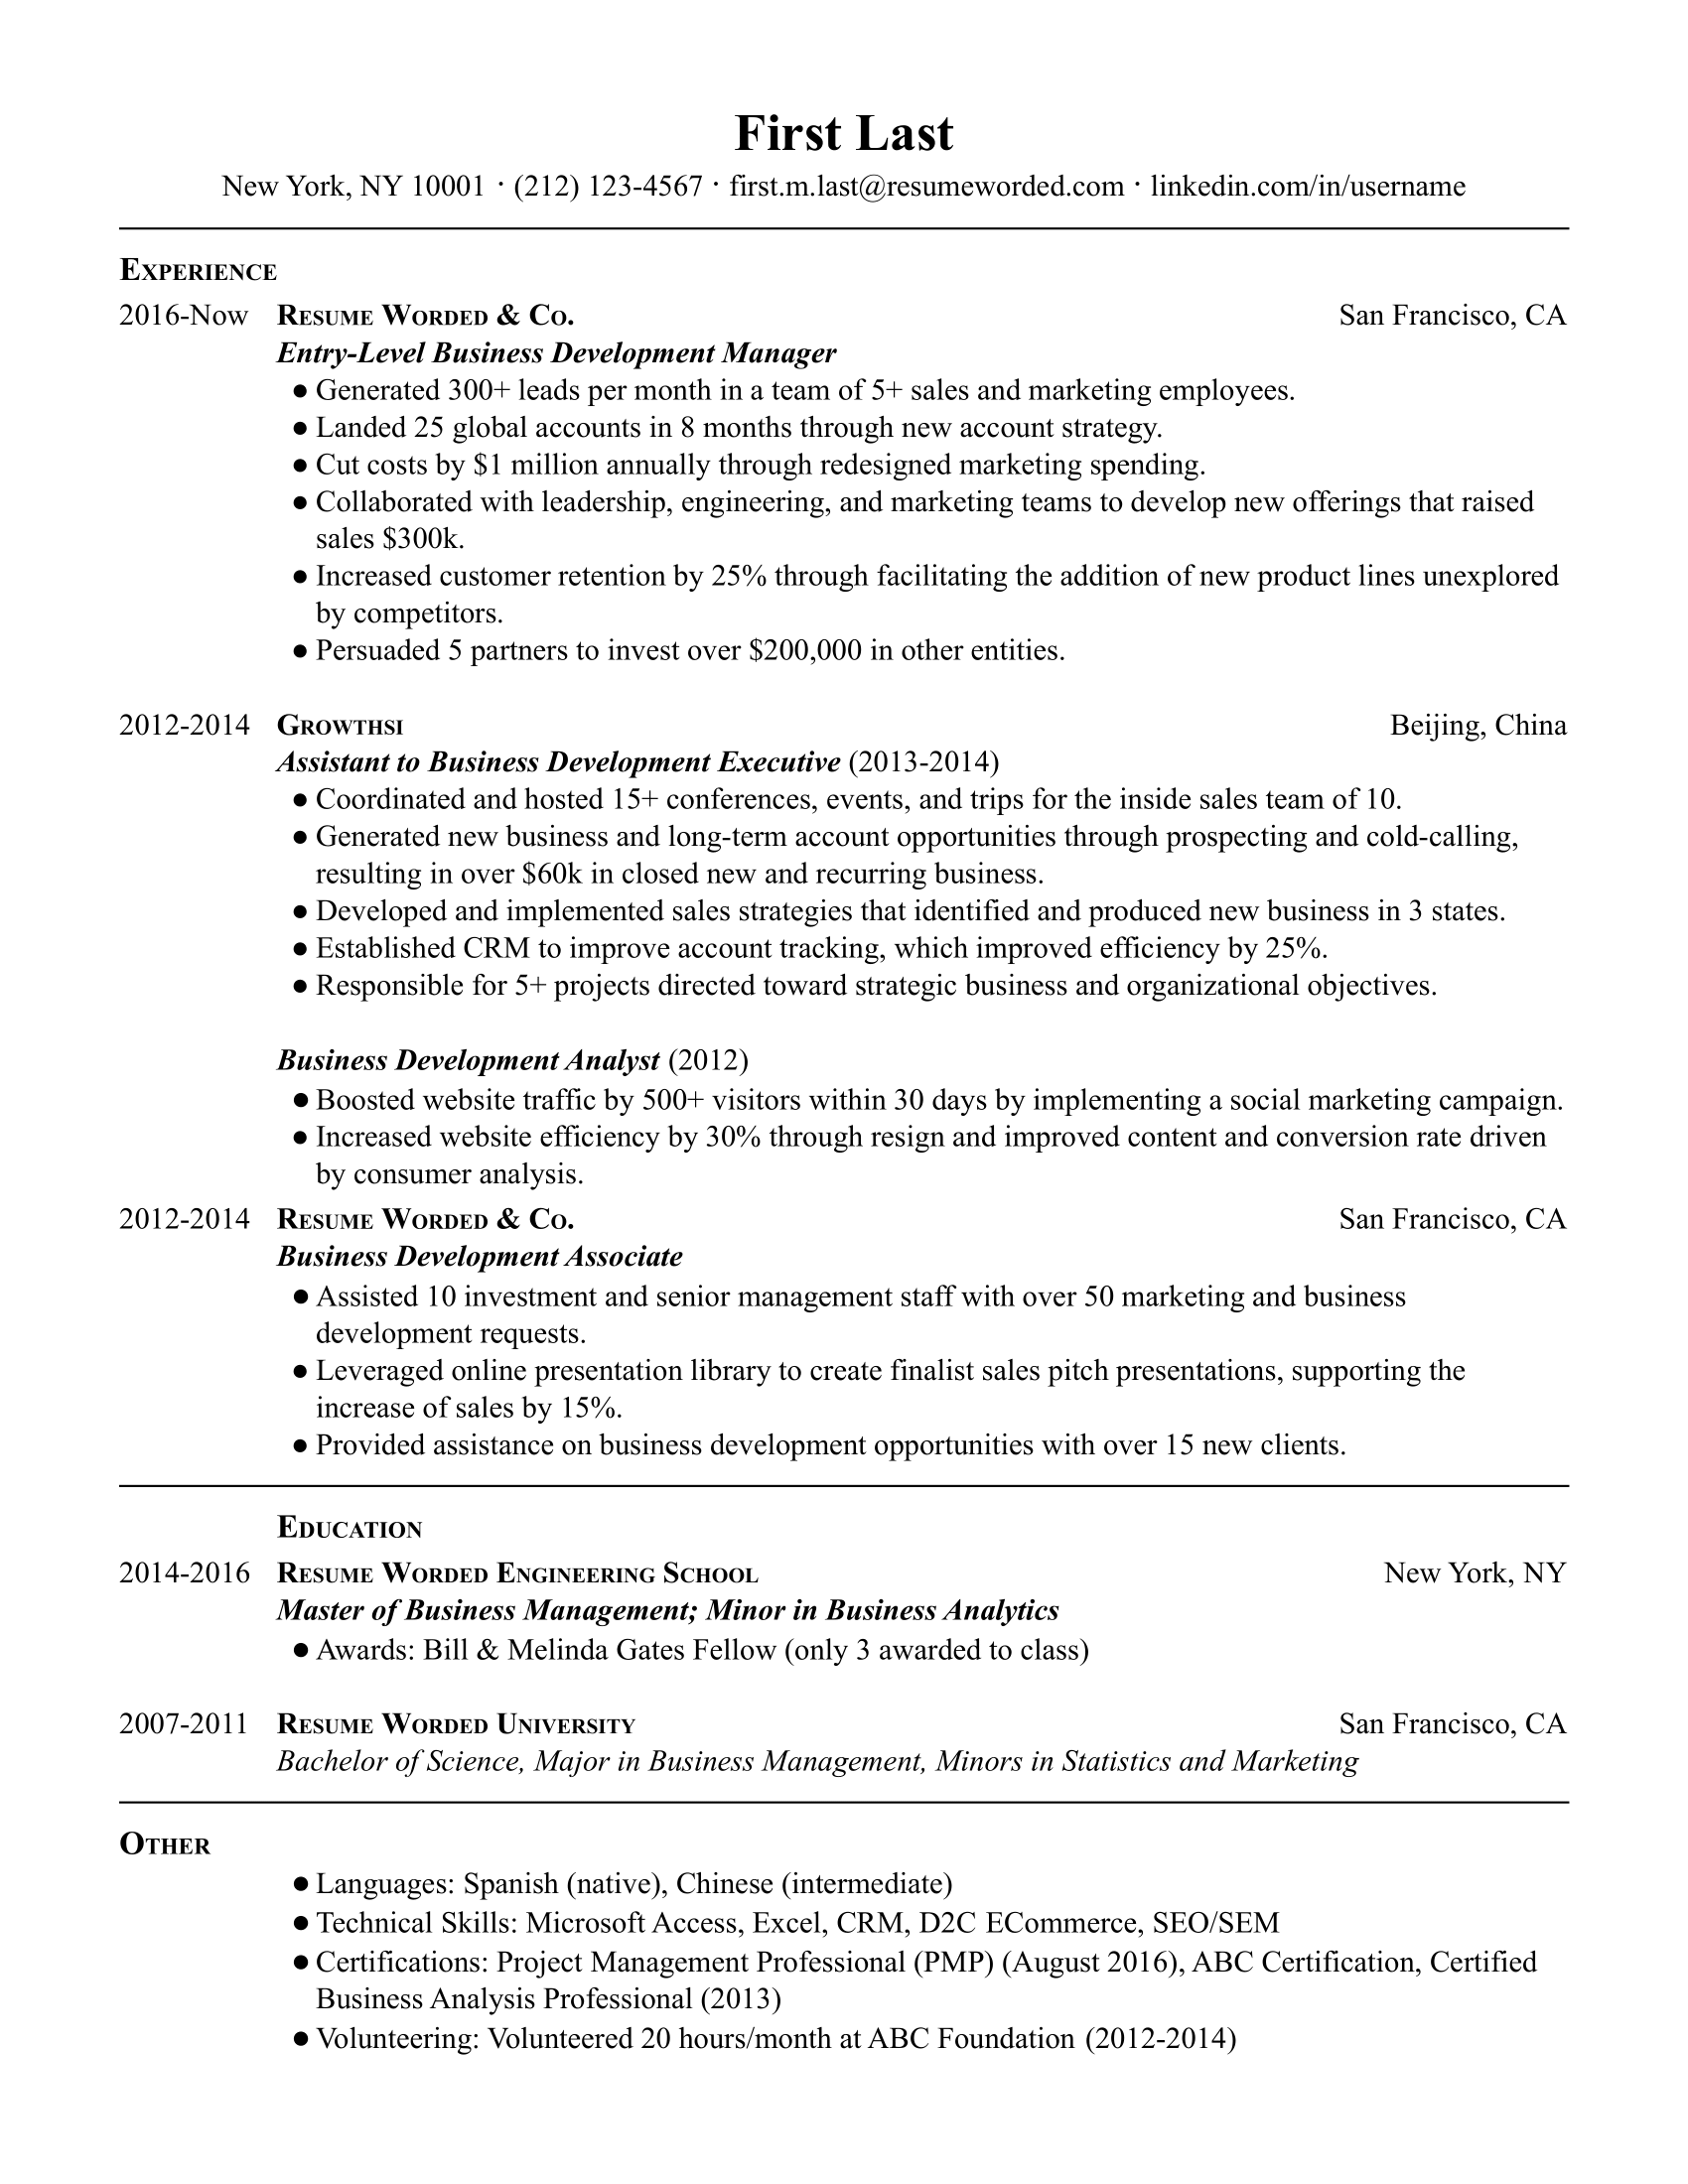 A resume for an entry level business development manager with a master's degree in business and experience as business development analyst.